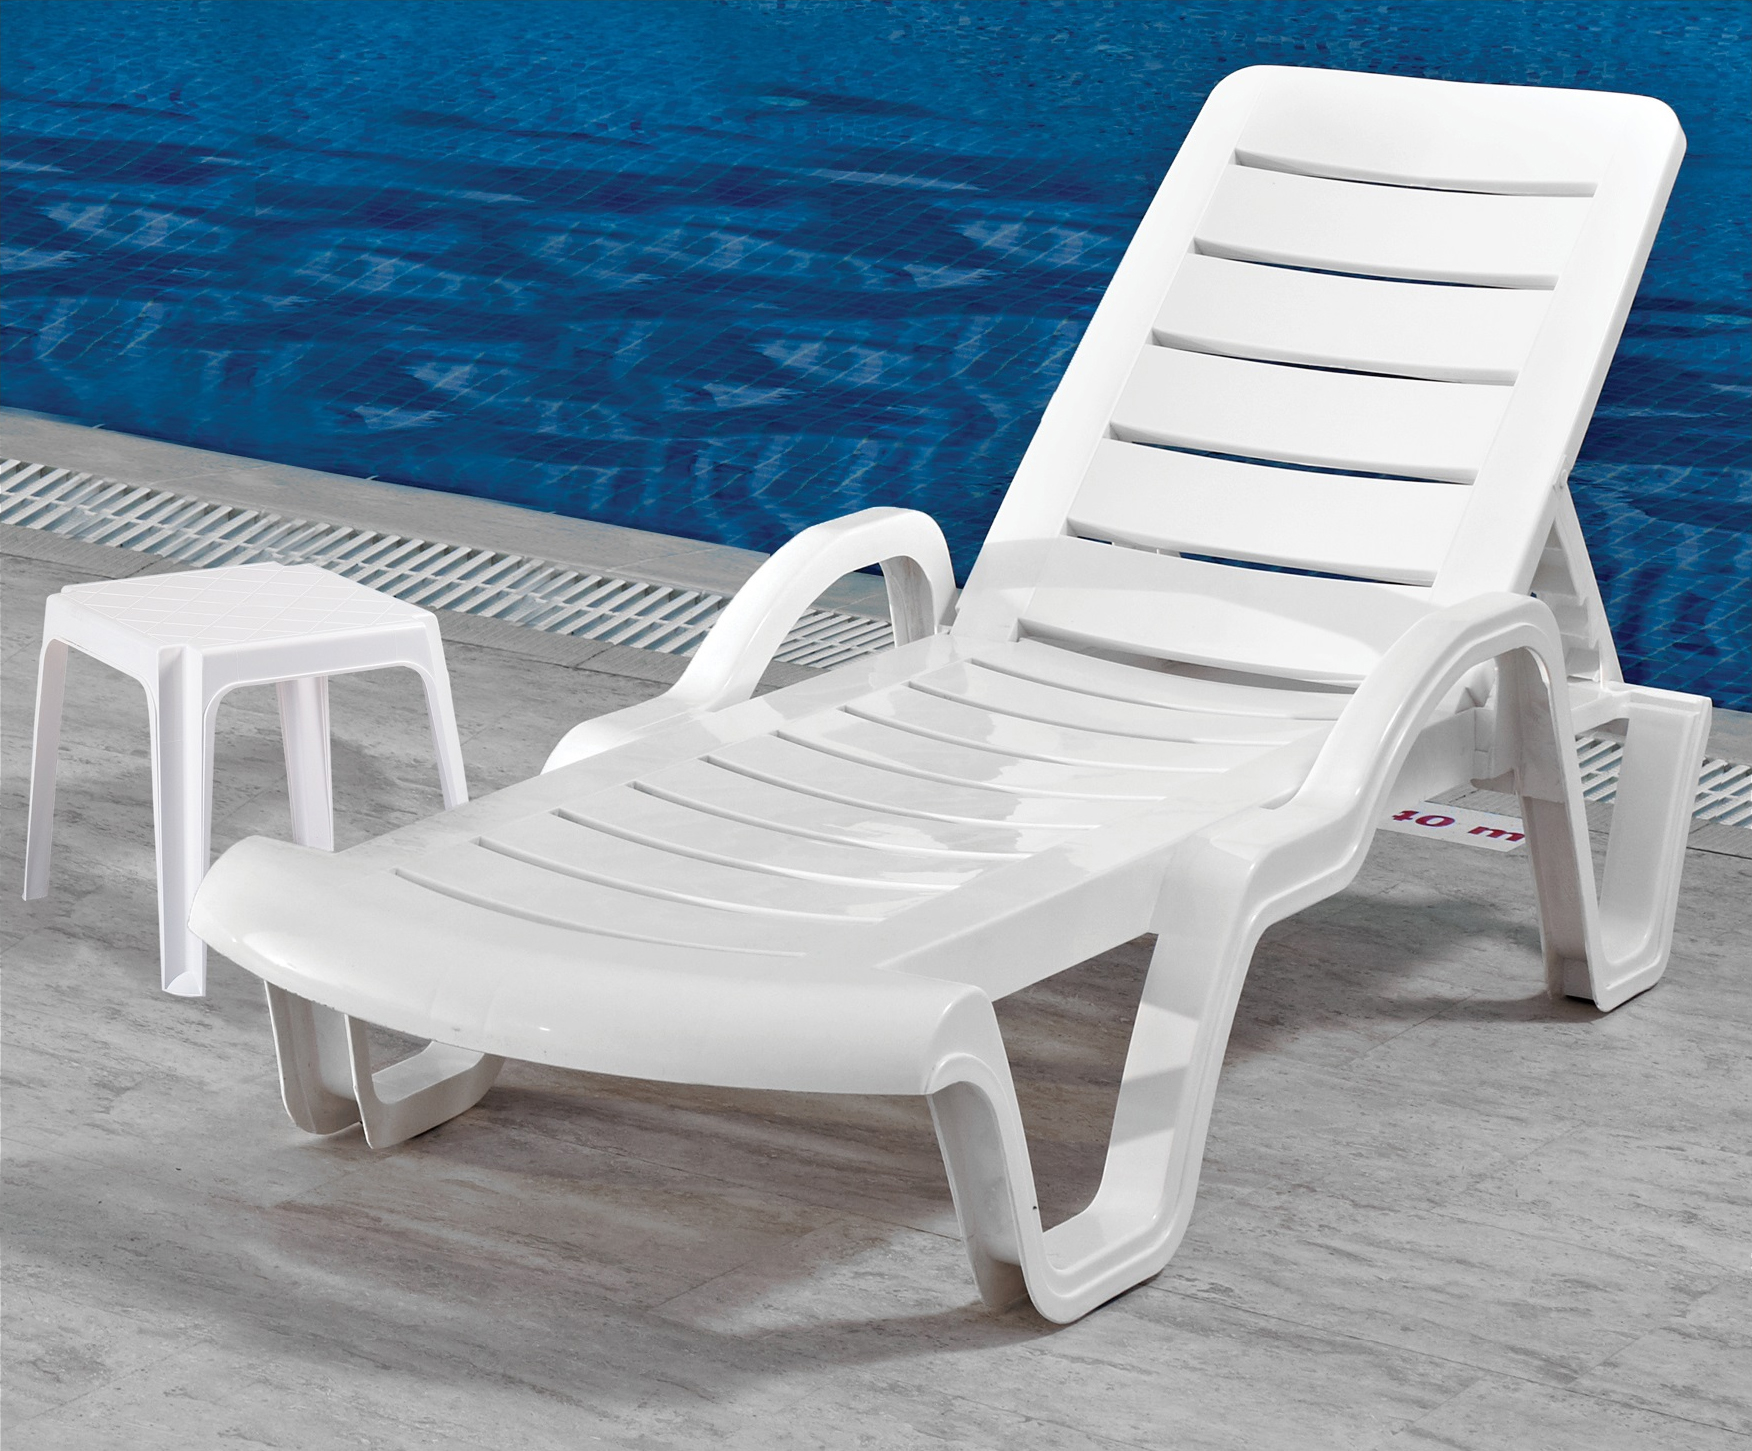 details about sun lounger outdoor garden patio white plastic wipe clean  reclining relaxer bed